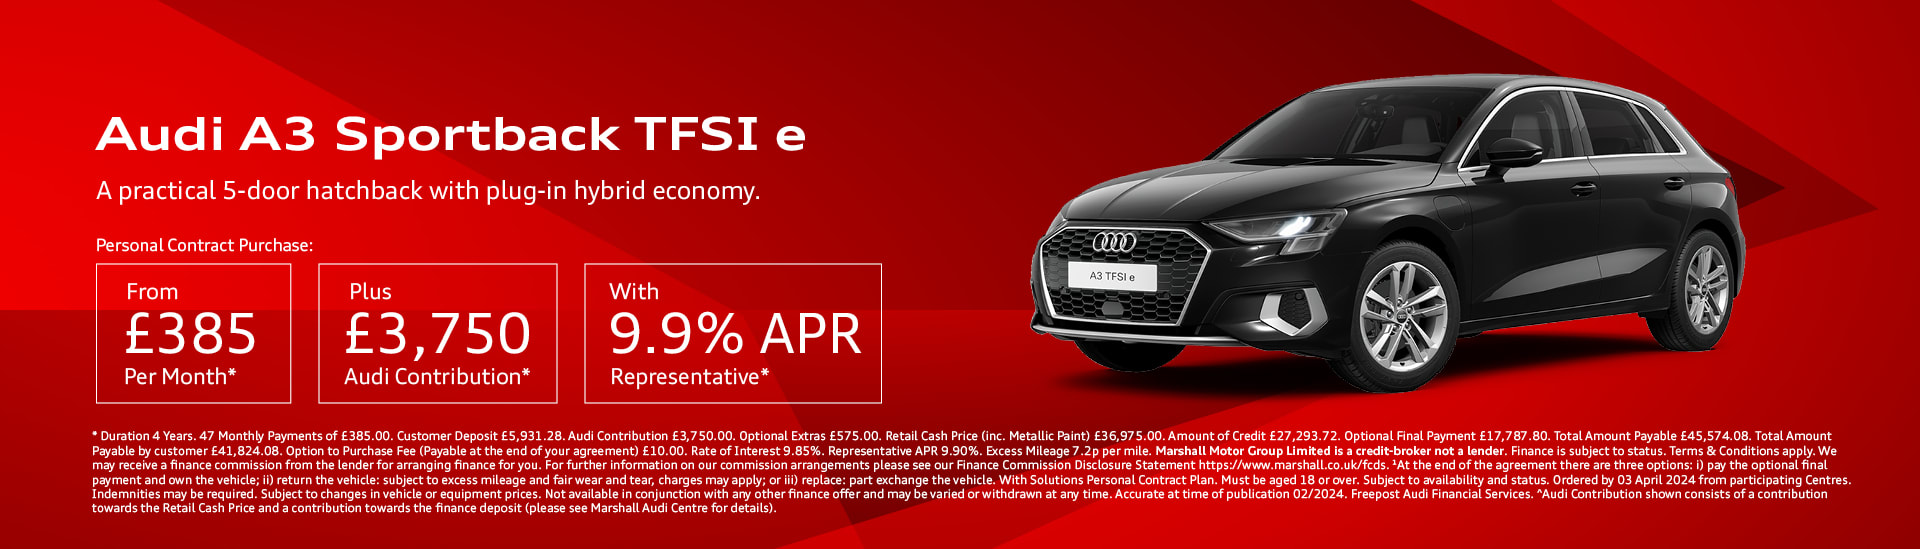 Audi A3 Sportback TFSI e Personal Contract Purchase Offer